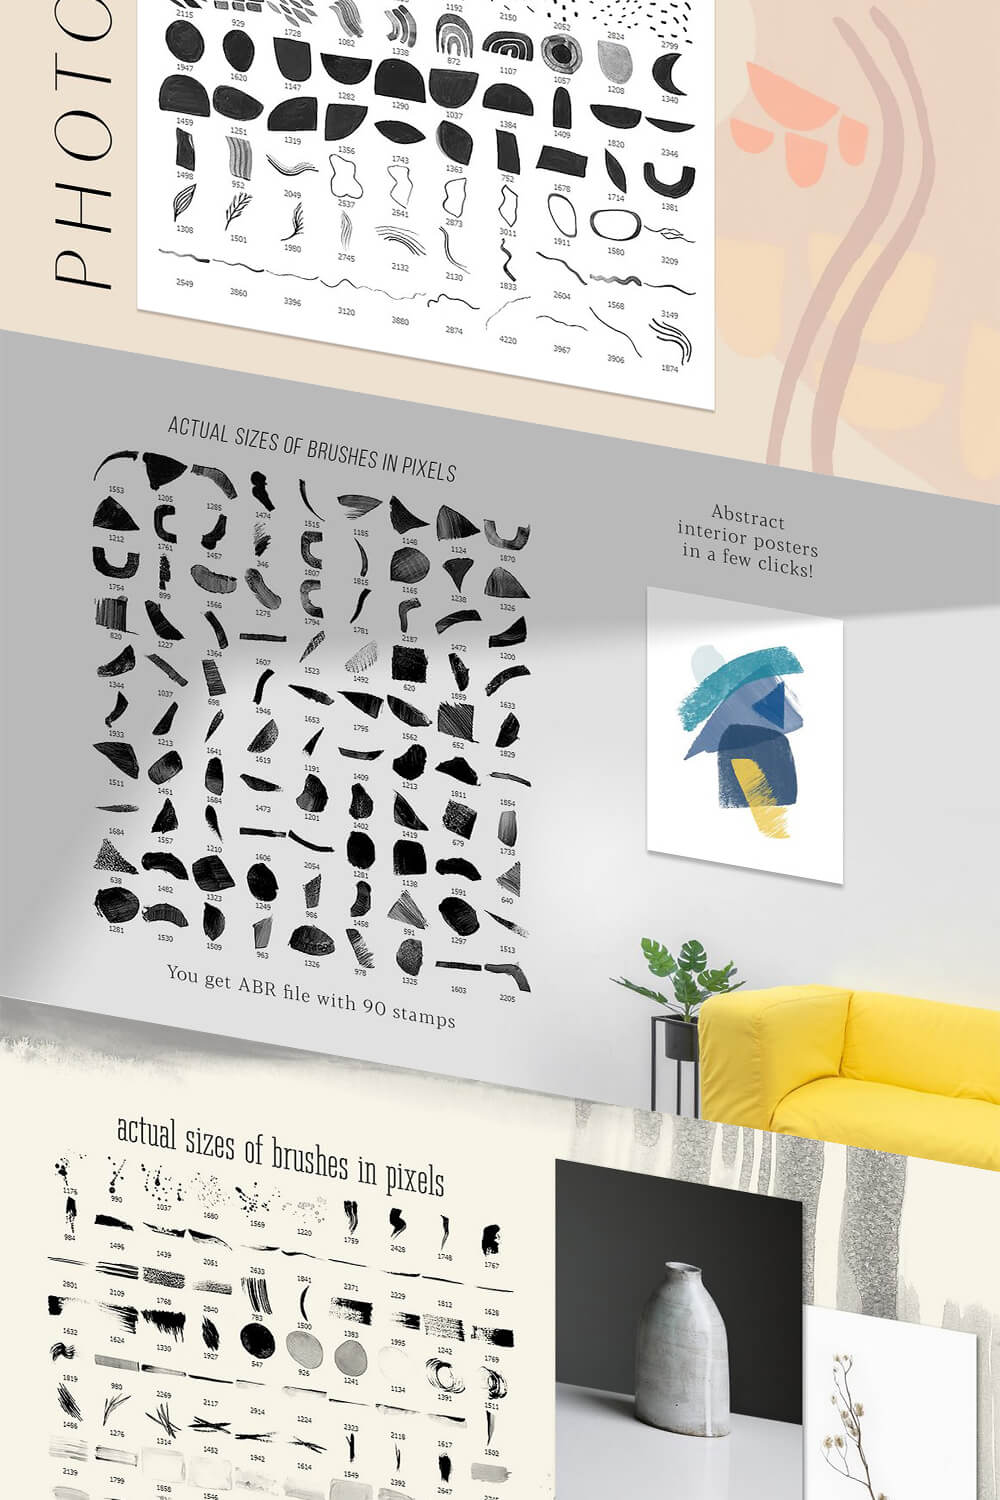 Abstract Interior Posters.